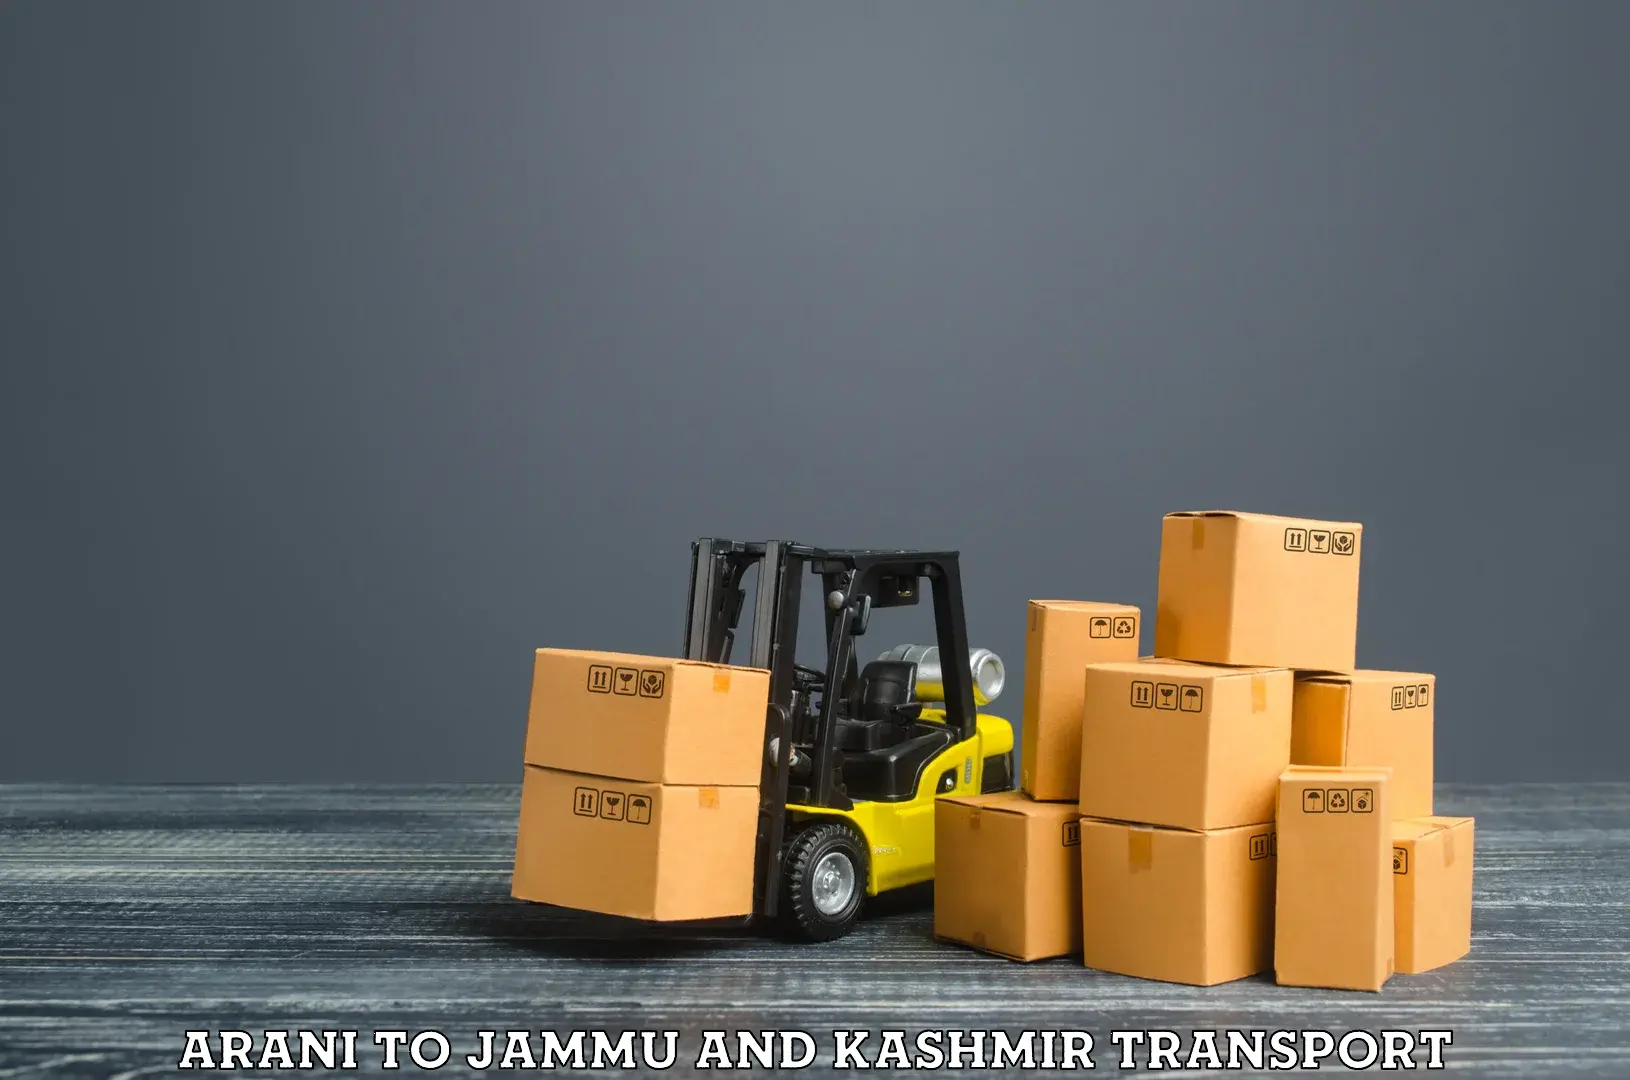 Daily transport service in Arani to Jammu and Kashmir